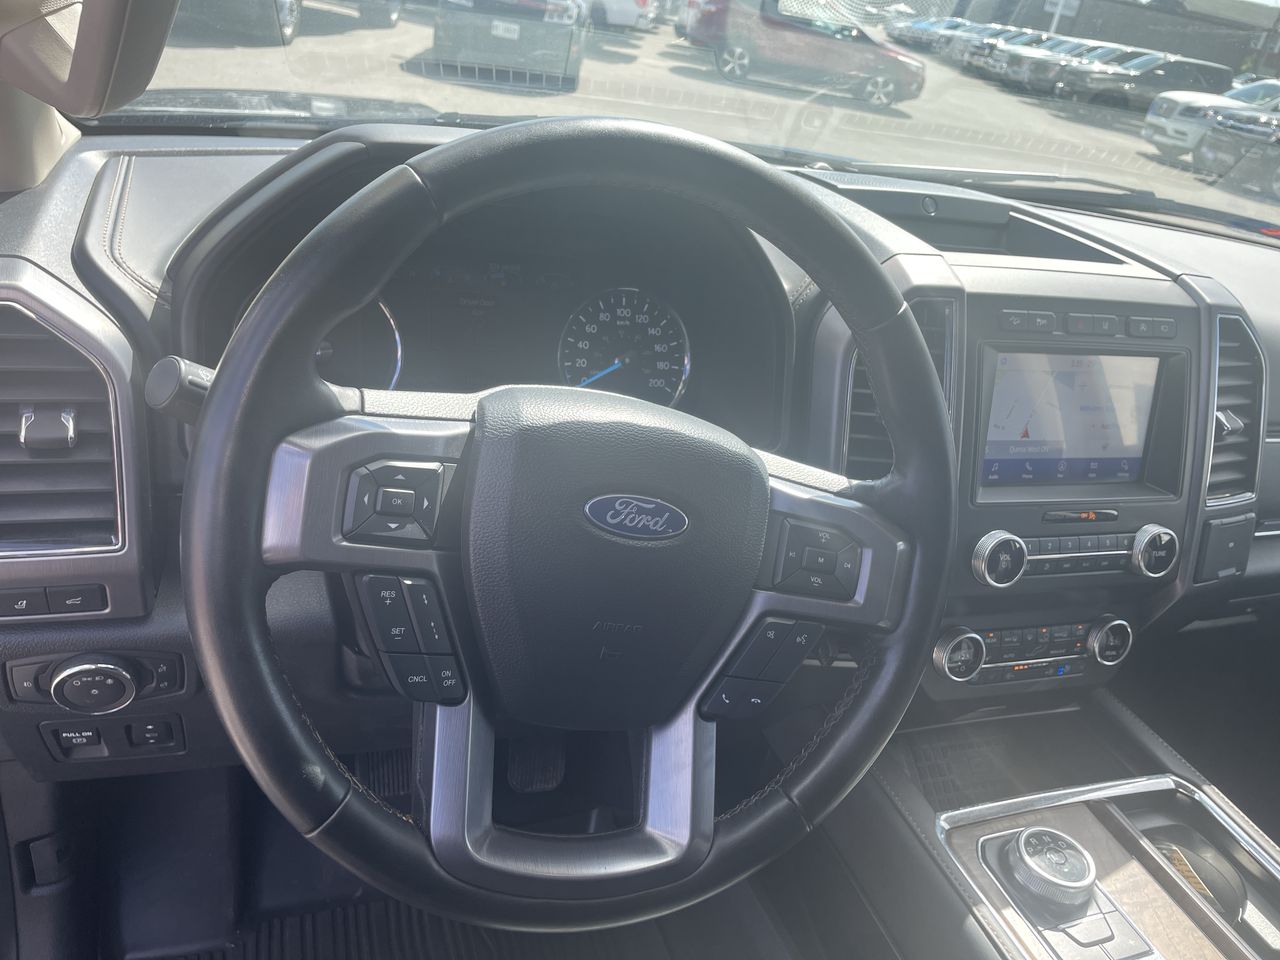 2021 Ford Expedition - P21237 Full Image 14